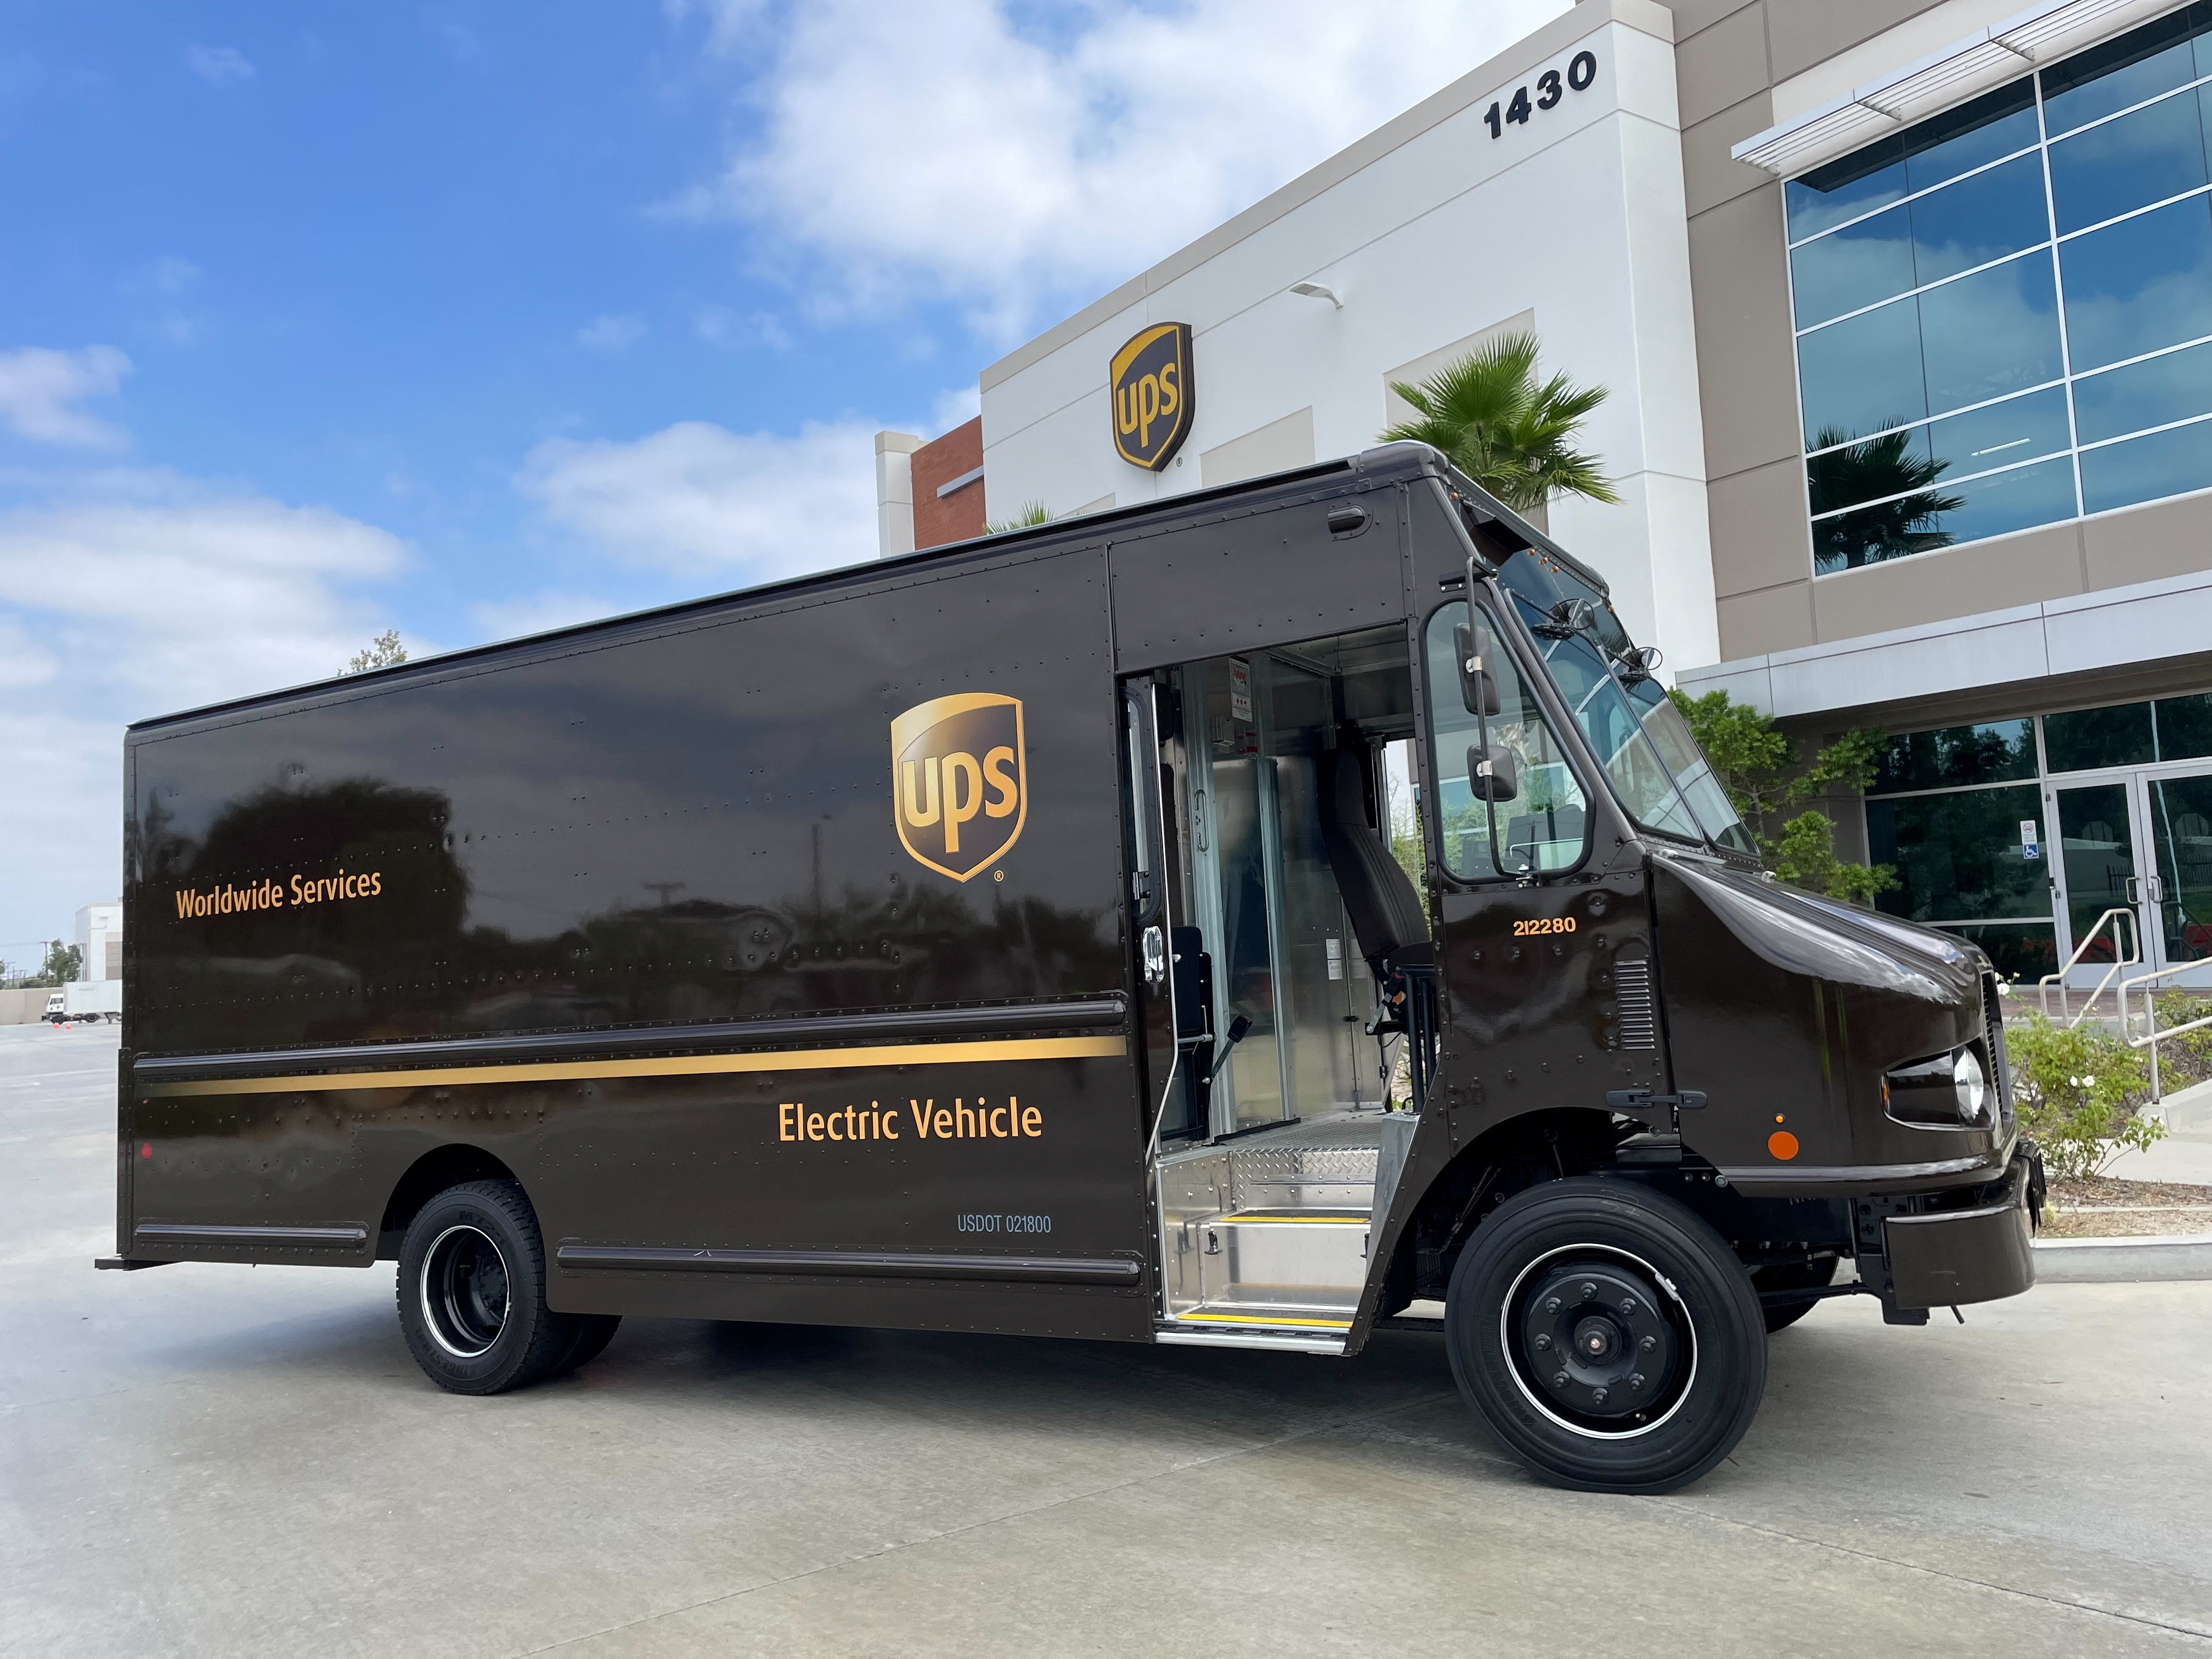 United Parcel Service's (UPS) newly launched electric delivery truck is seen in Compton